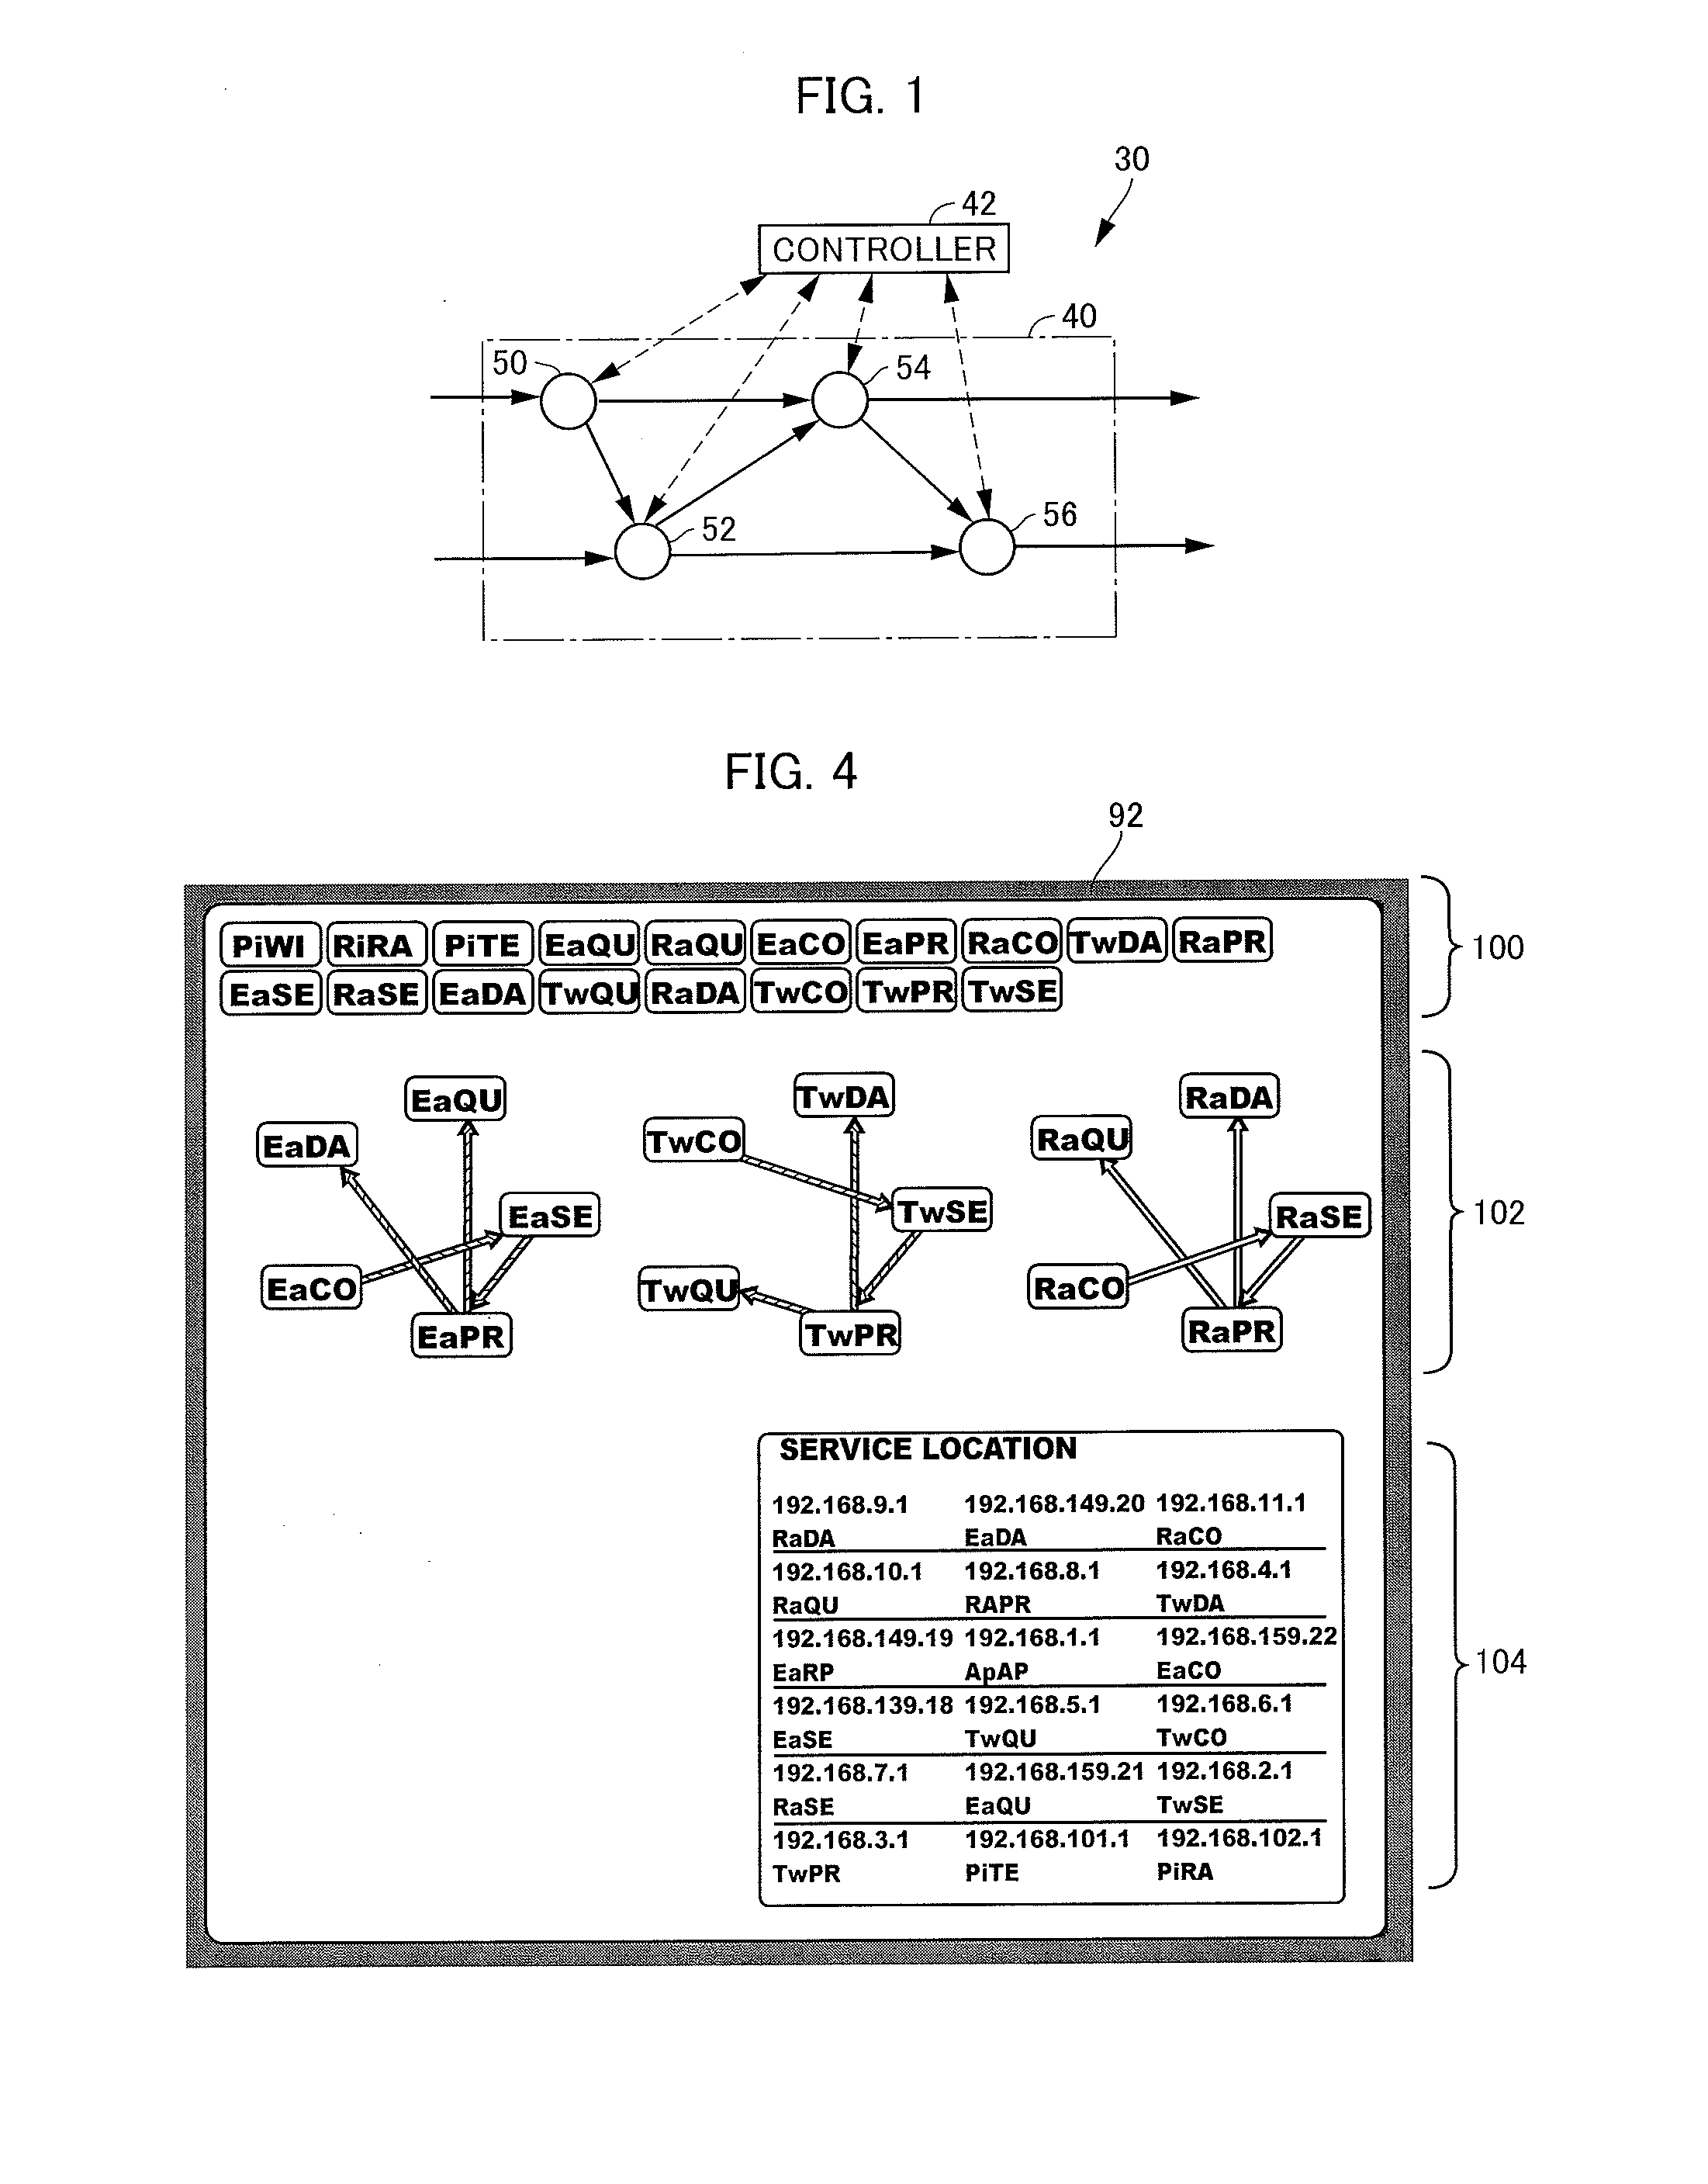 Network configuration and operation visualizing apparatus